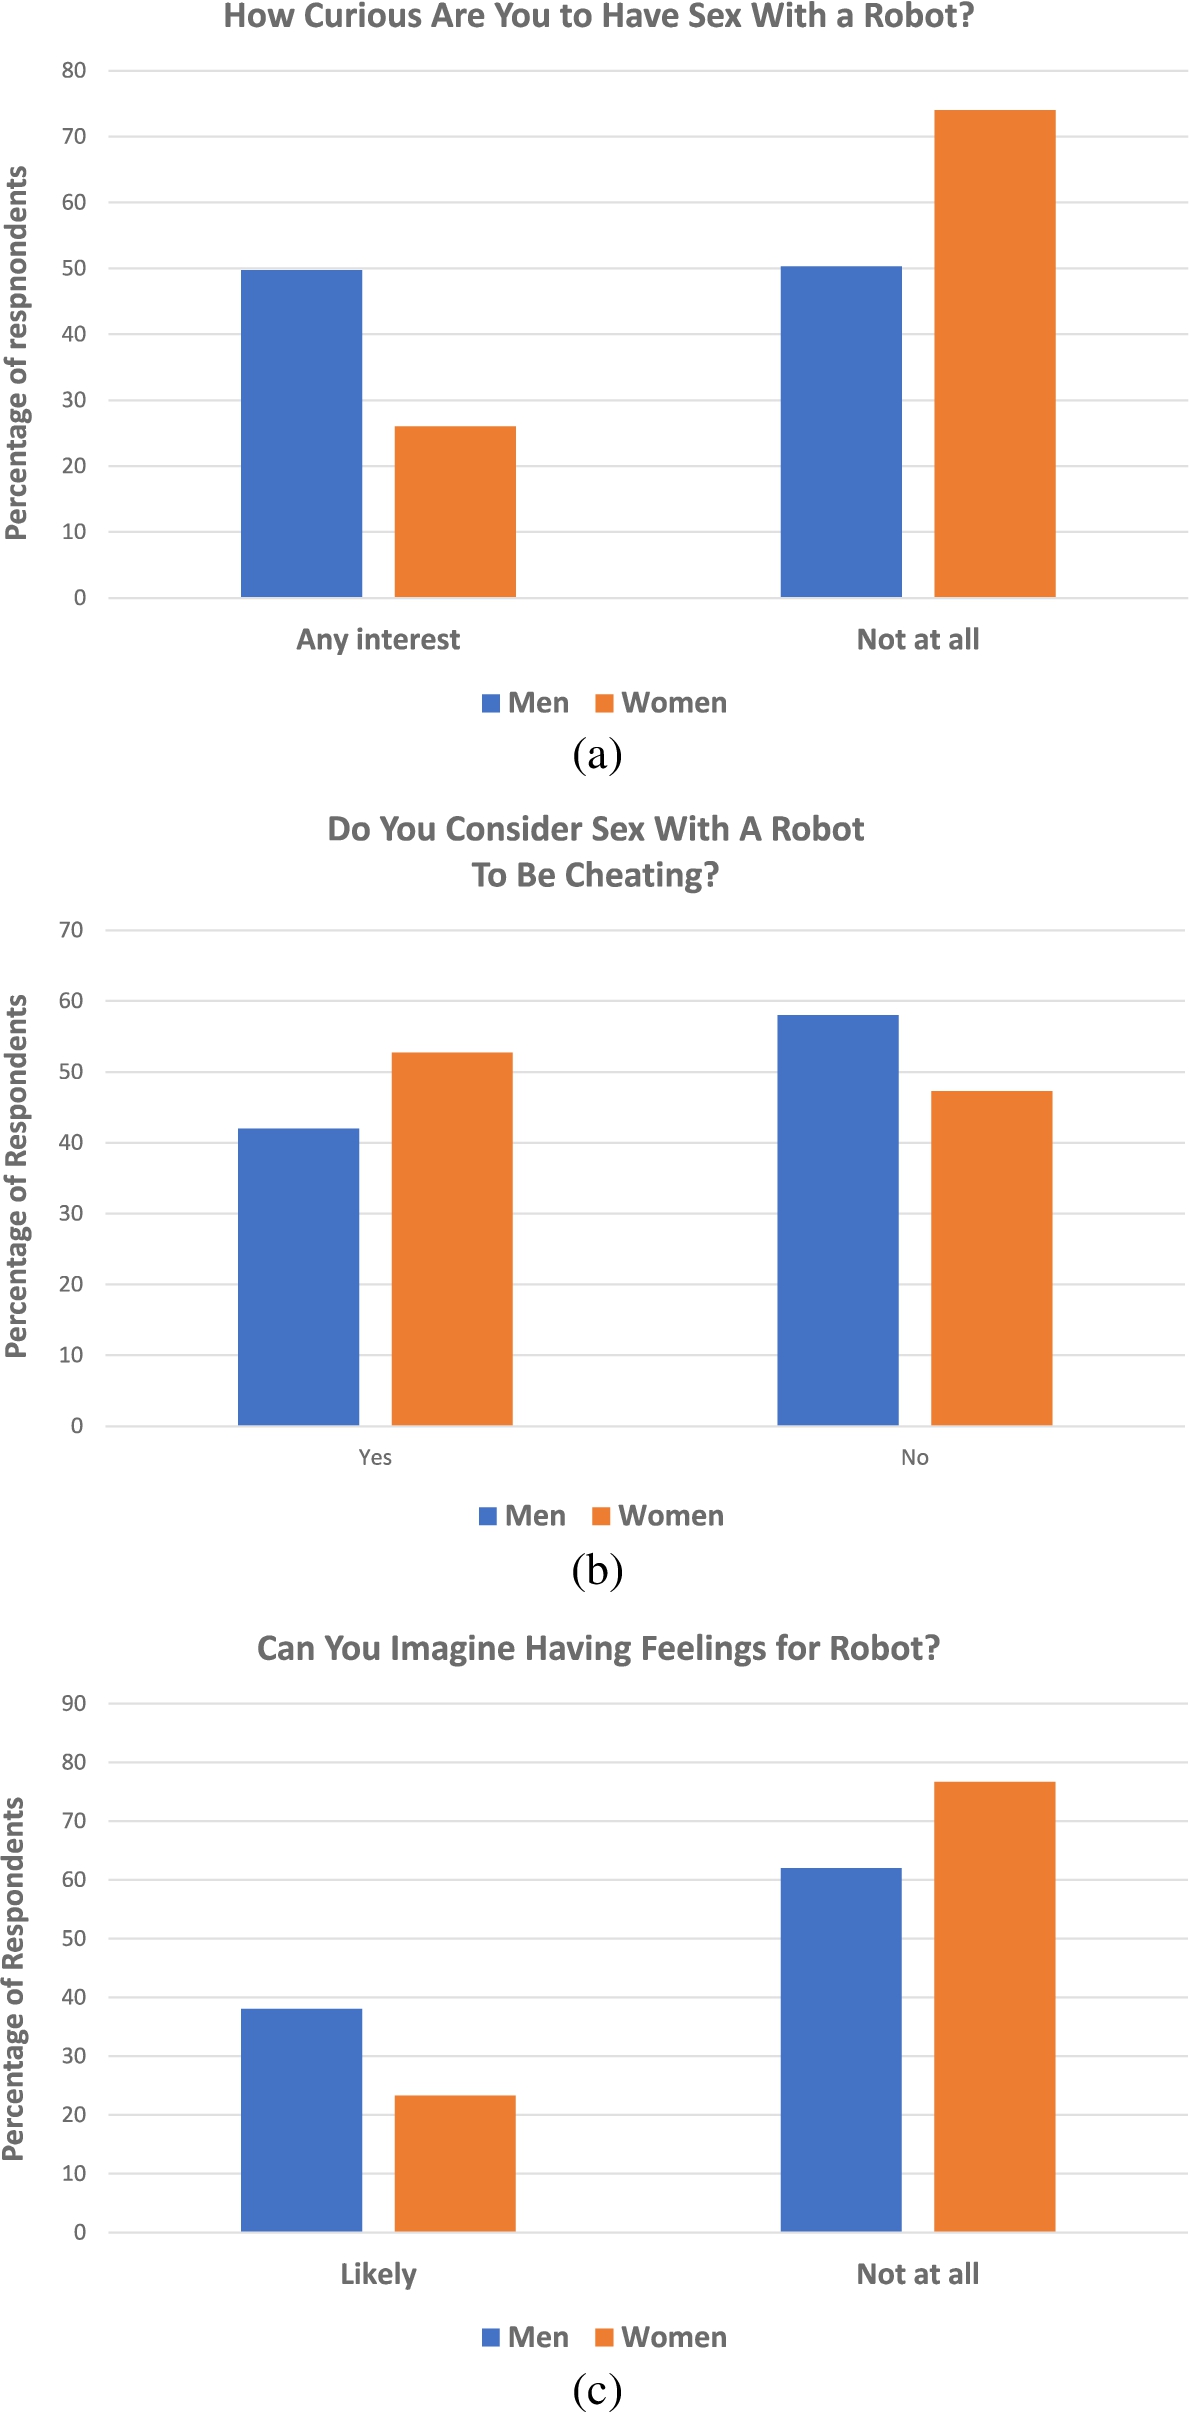 Comparison of male and female responses to six questions regarding sex robots. Comparison of male and female responses all differed significantly with P<0.001 except for the question asking “Do you consider sex with a robot to be a form of cheating,” for which P=0.05.